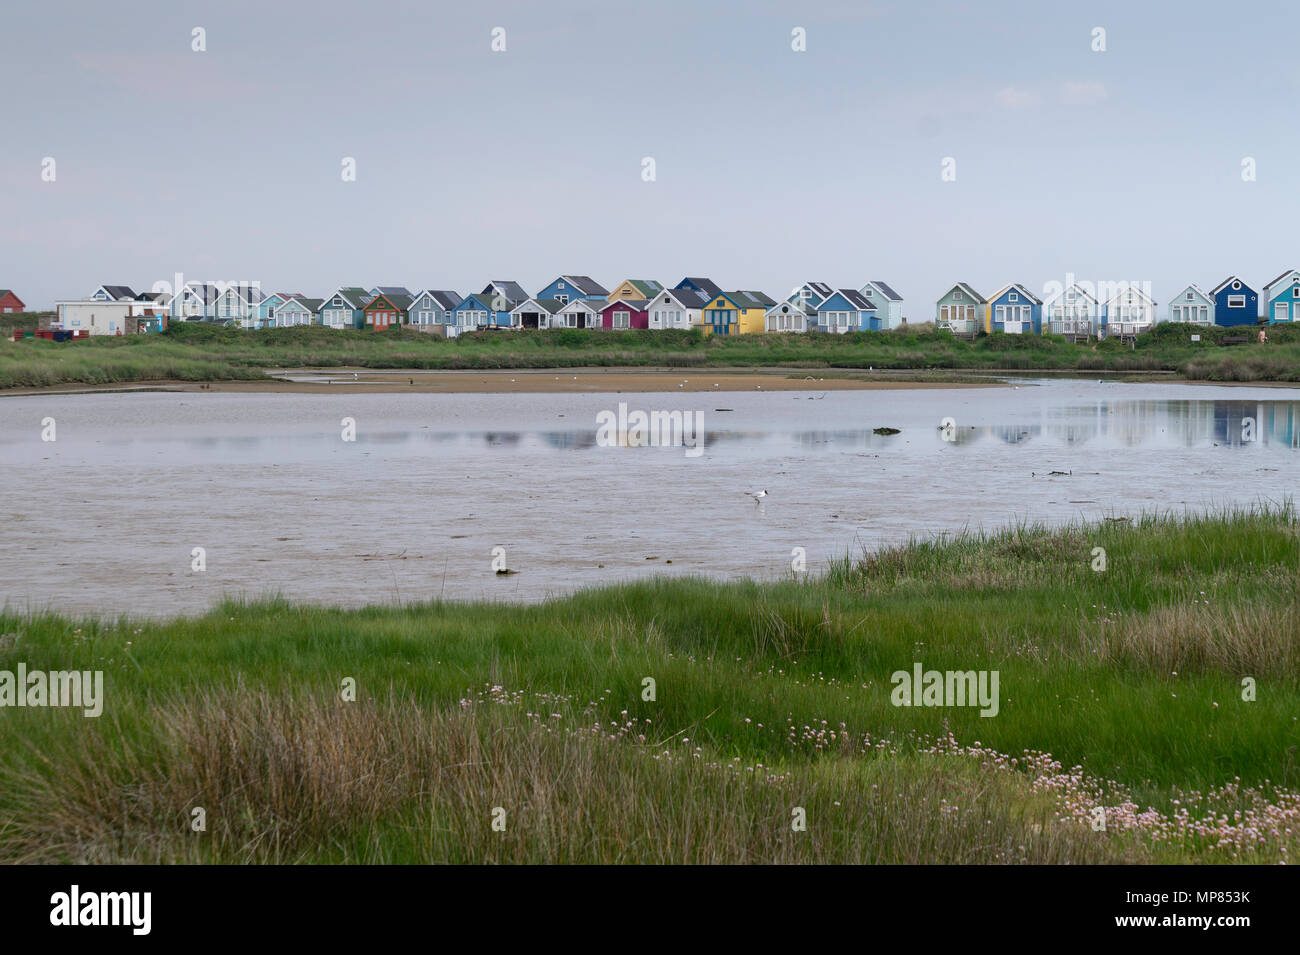 The Harbour facing beach huts viewed from across Holloway's Dock. Stock Photo